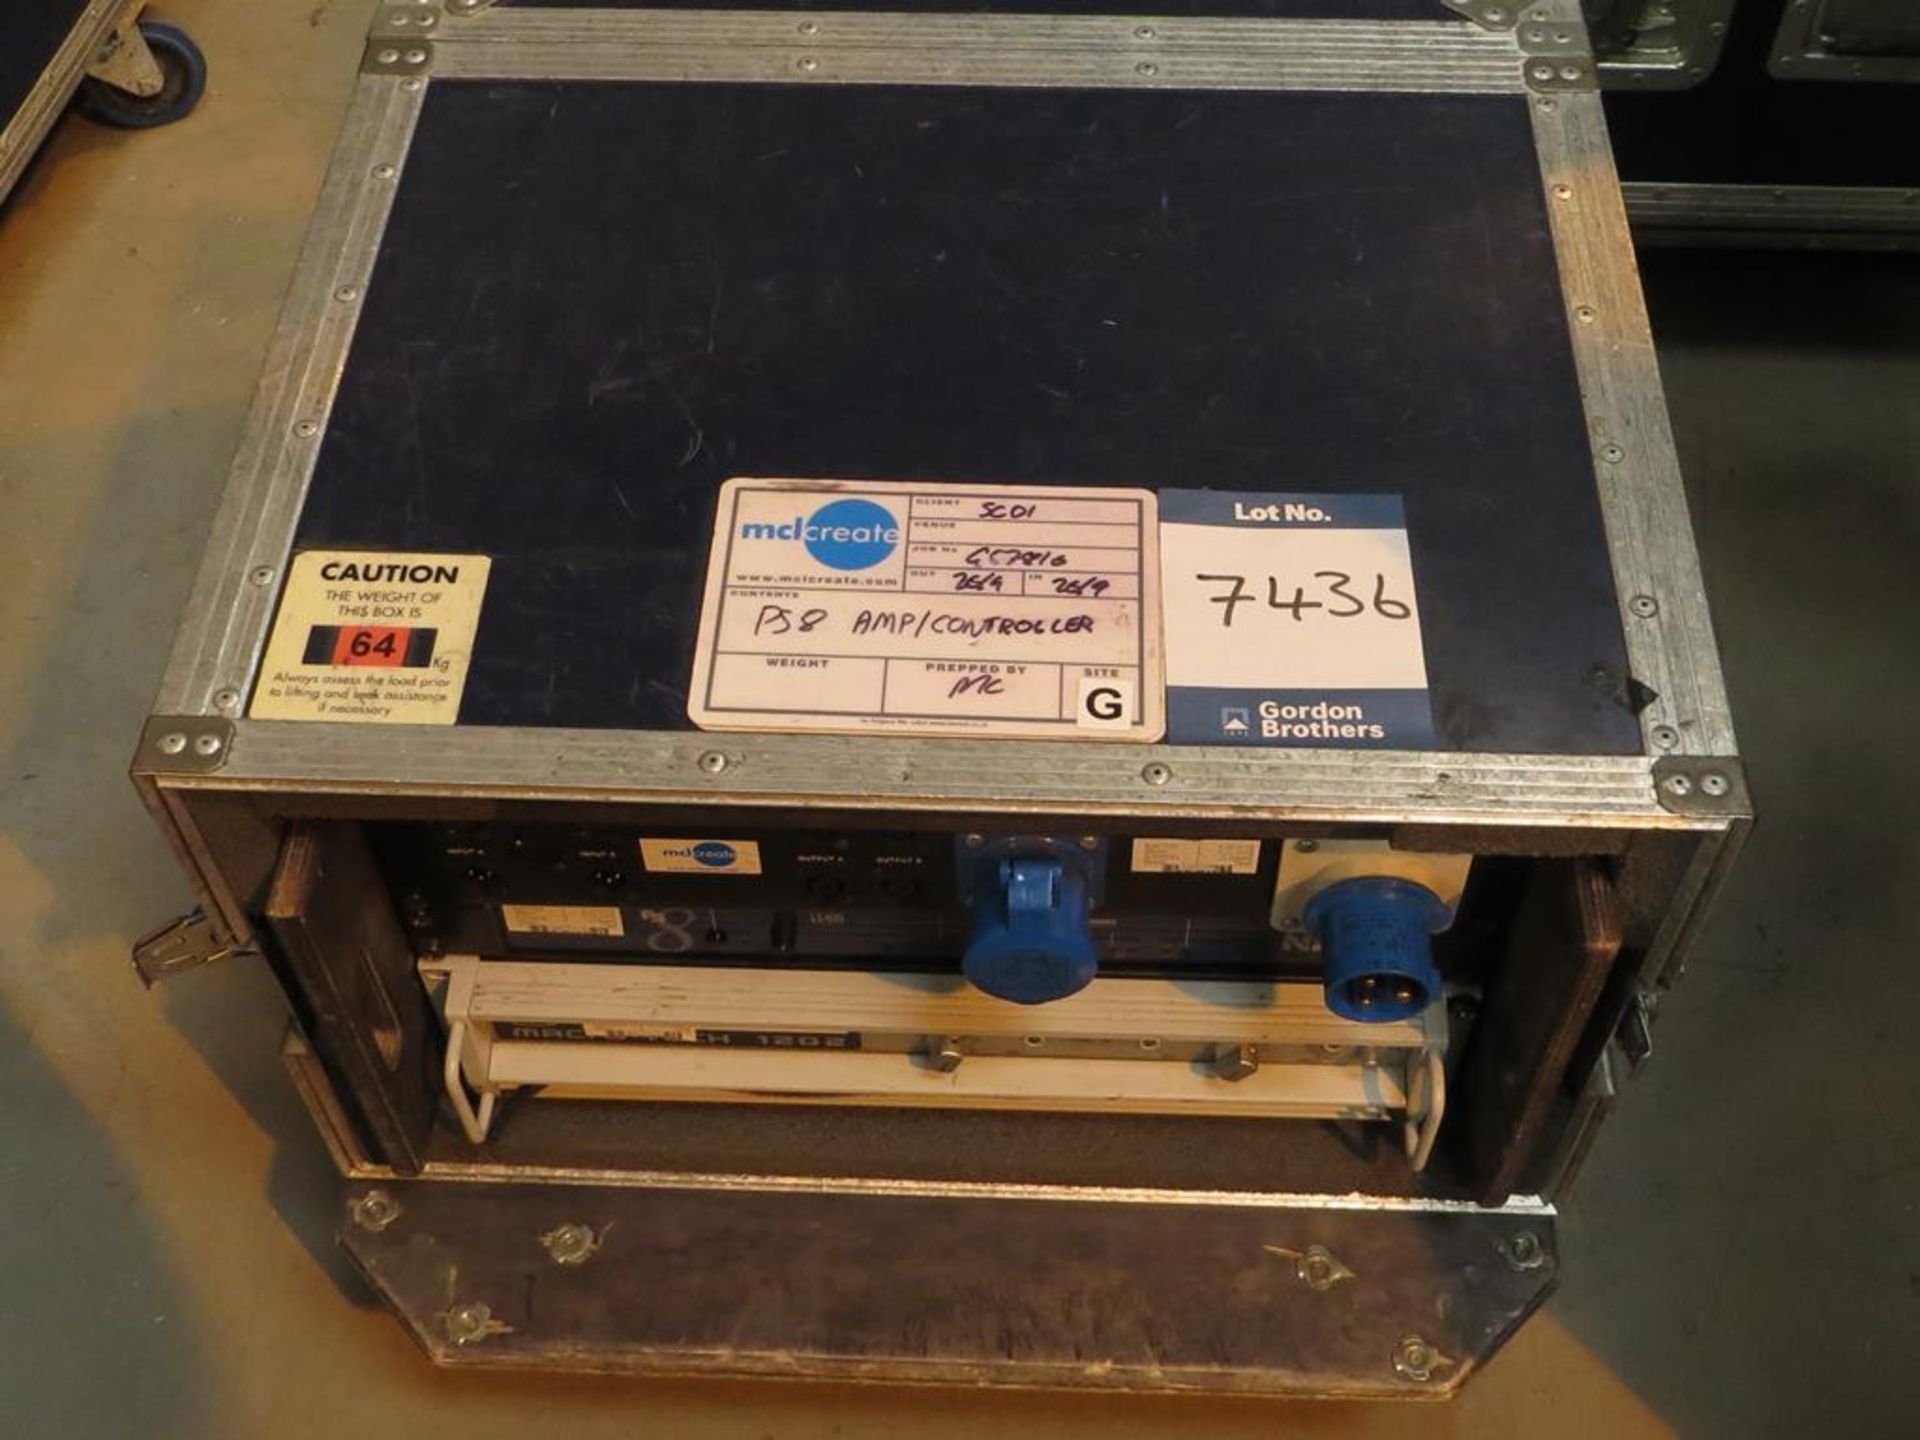 Crown Macrotech, 1201 power amplifier and Nexo, PS15100 eight speaker controller in transit case: